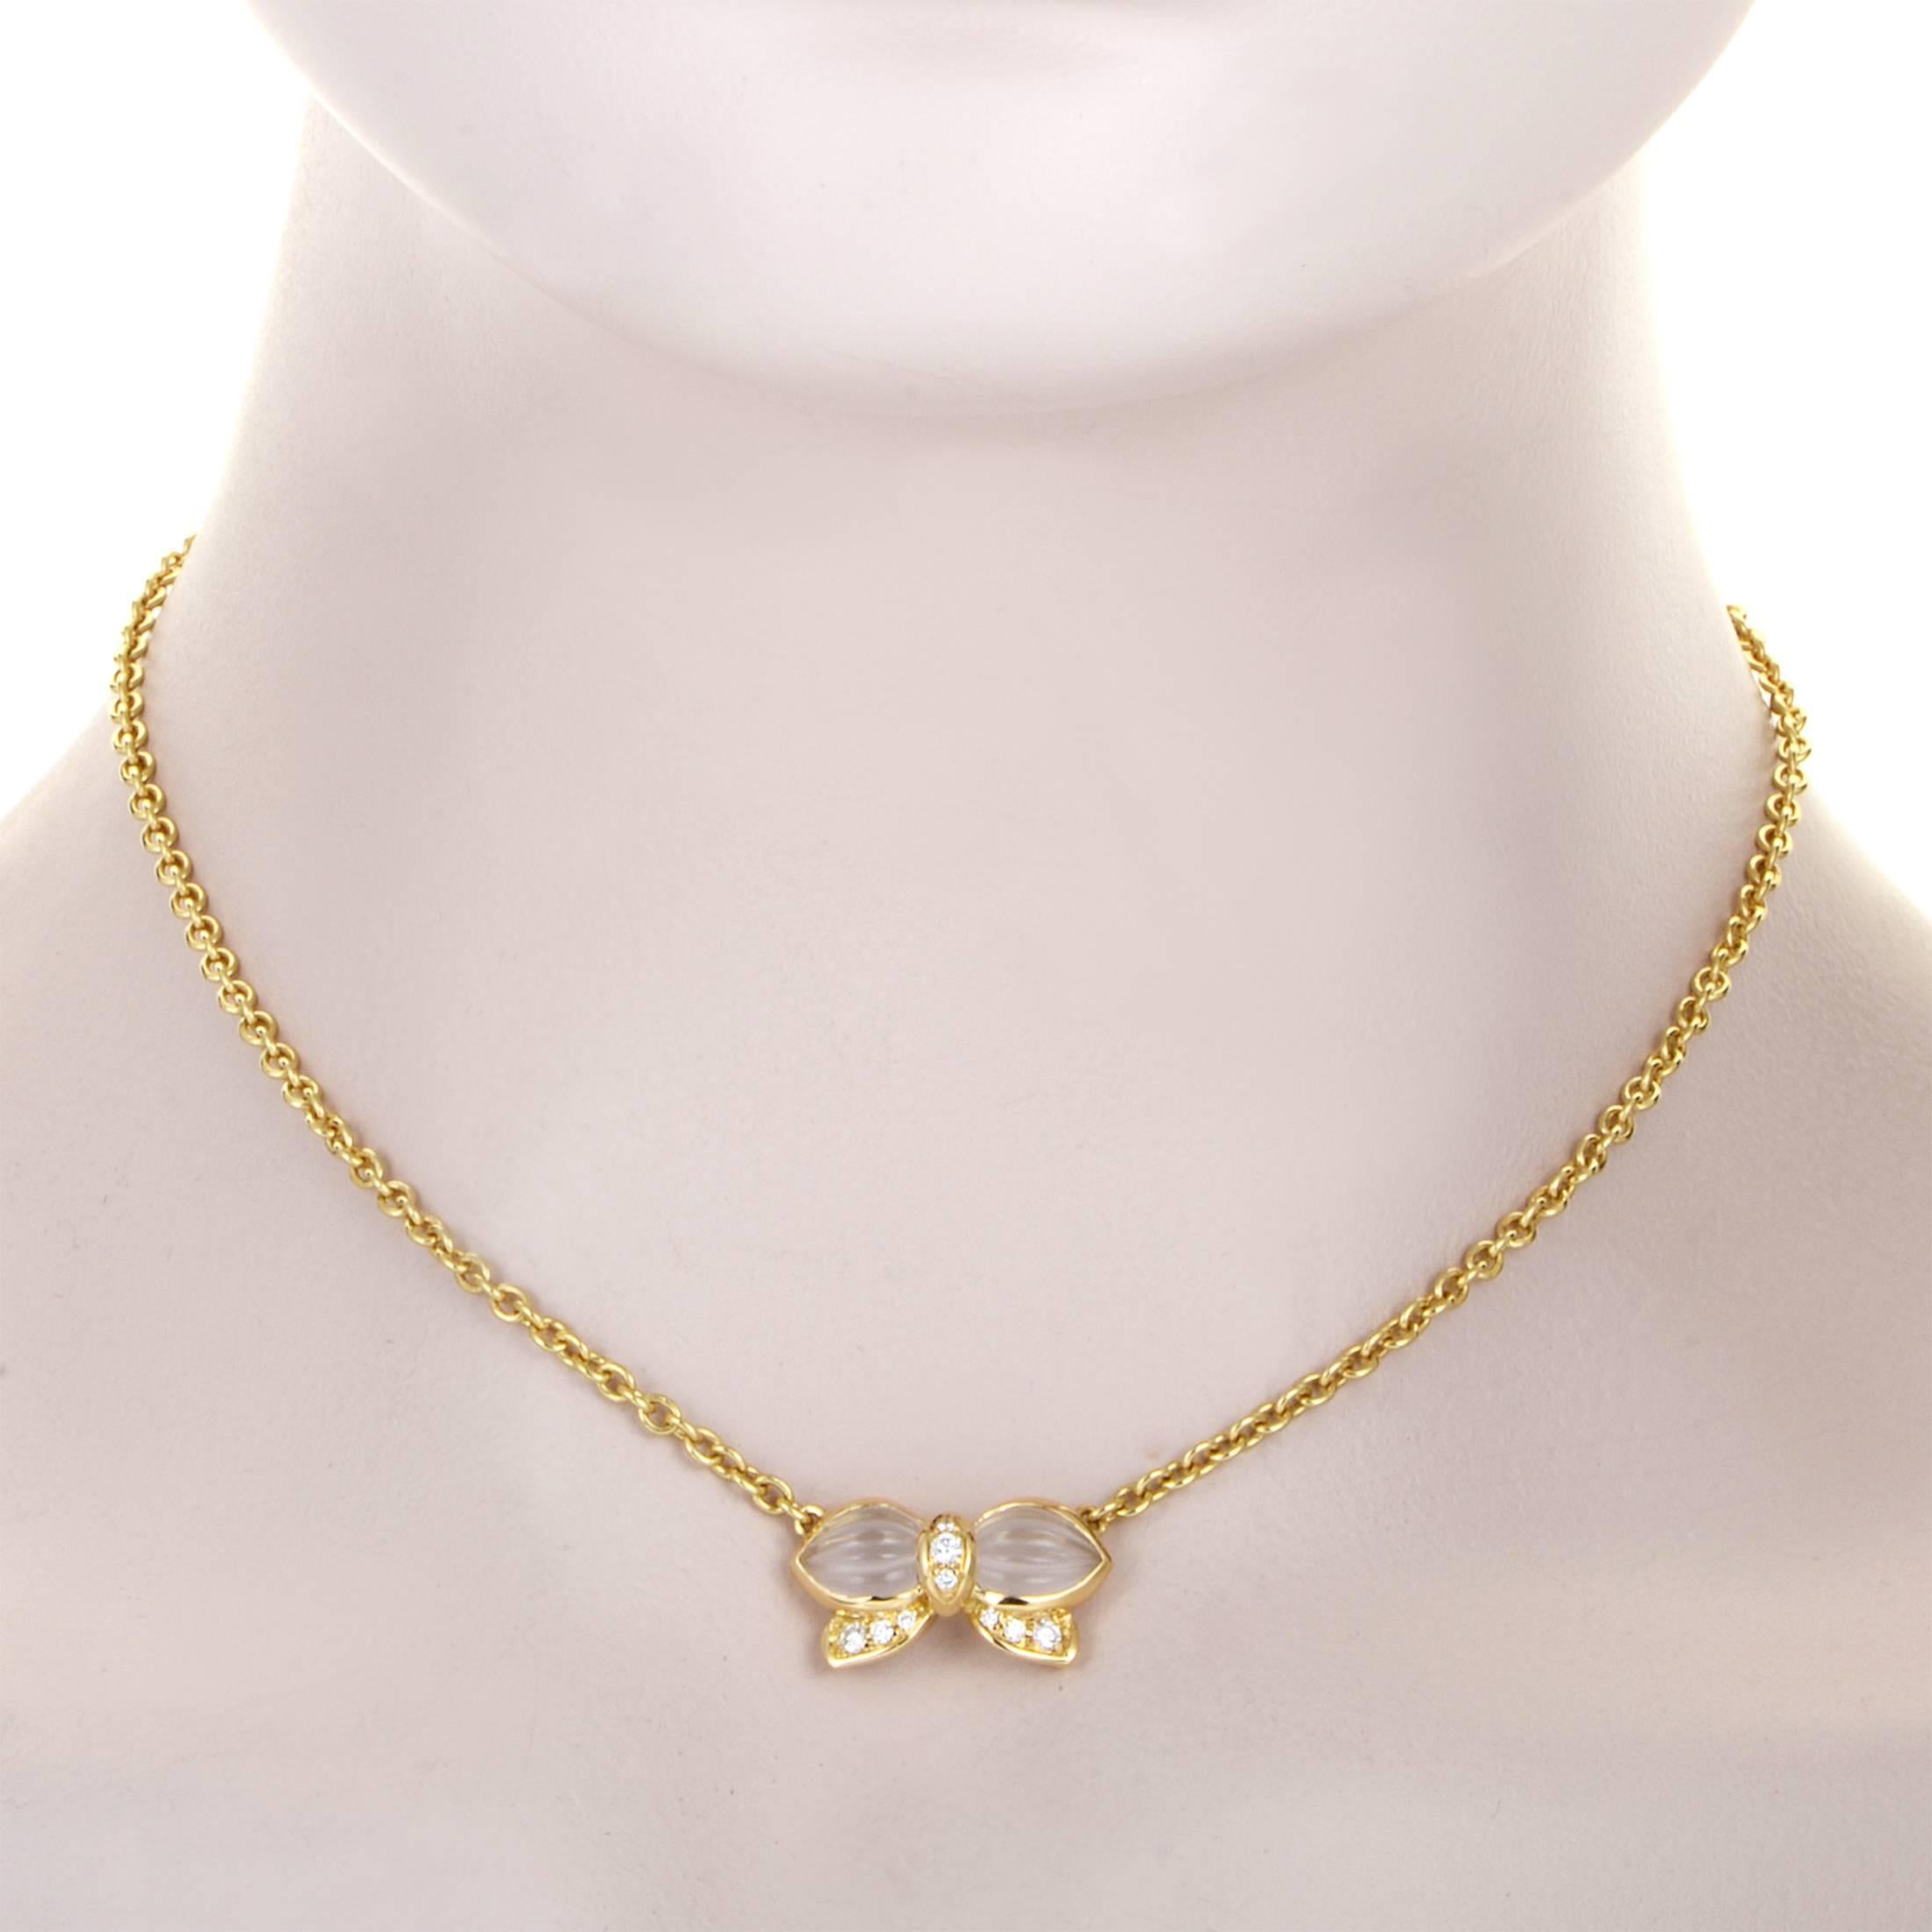 The marvelous shape of a bow is made of radiant 18K yellow gold and embellished with glistening diamonds weighing in total 0.25ct as well as two splendid crystals in this stylish and delightful necklace from Boucheron.
Pendant Dimensions: 0.88 x